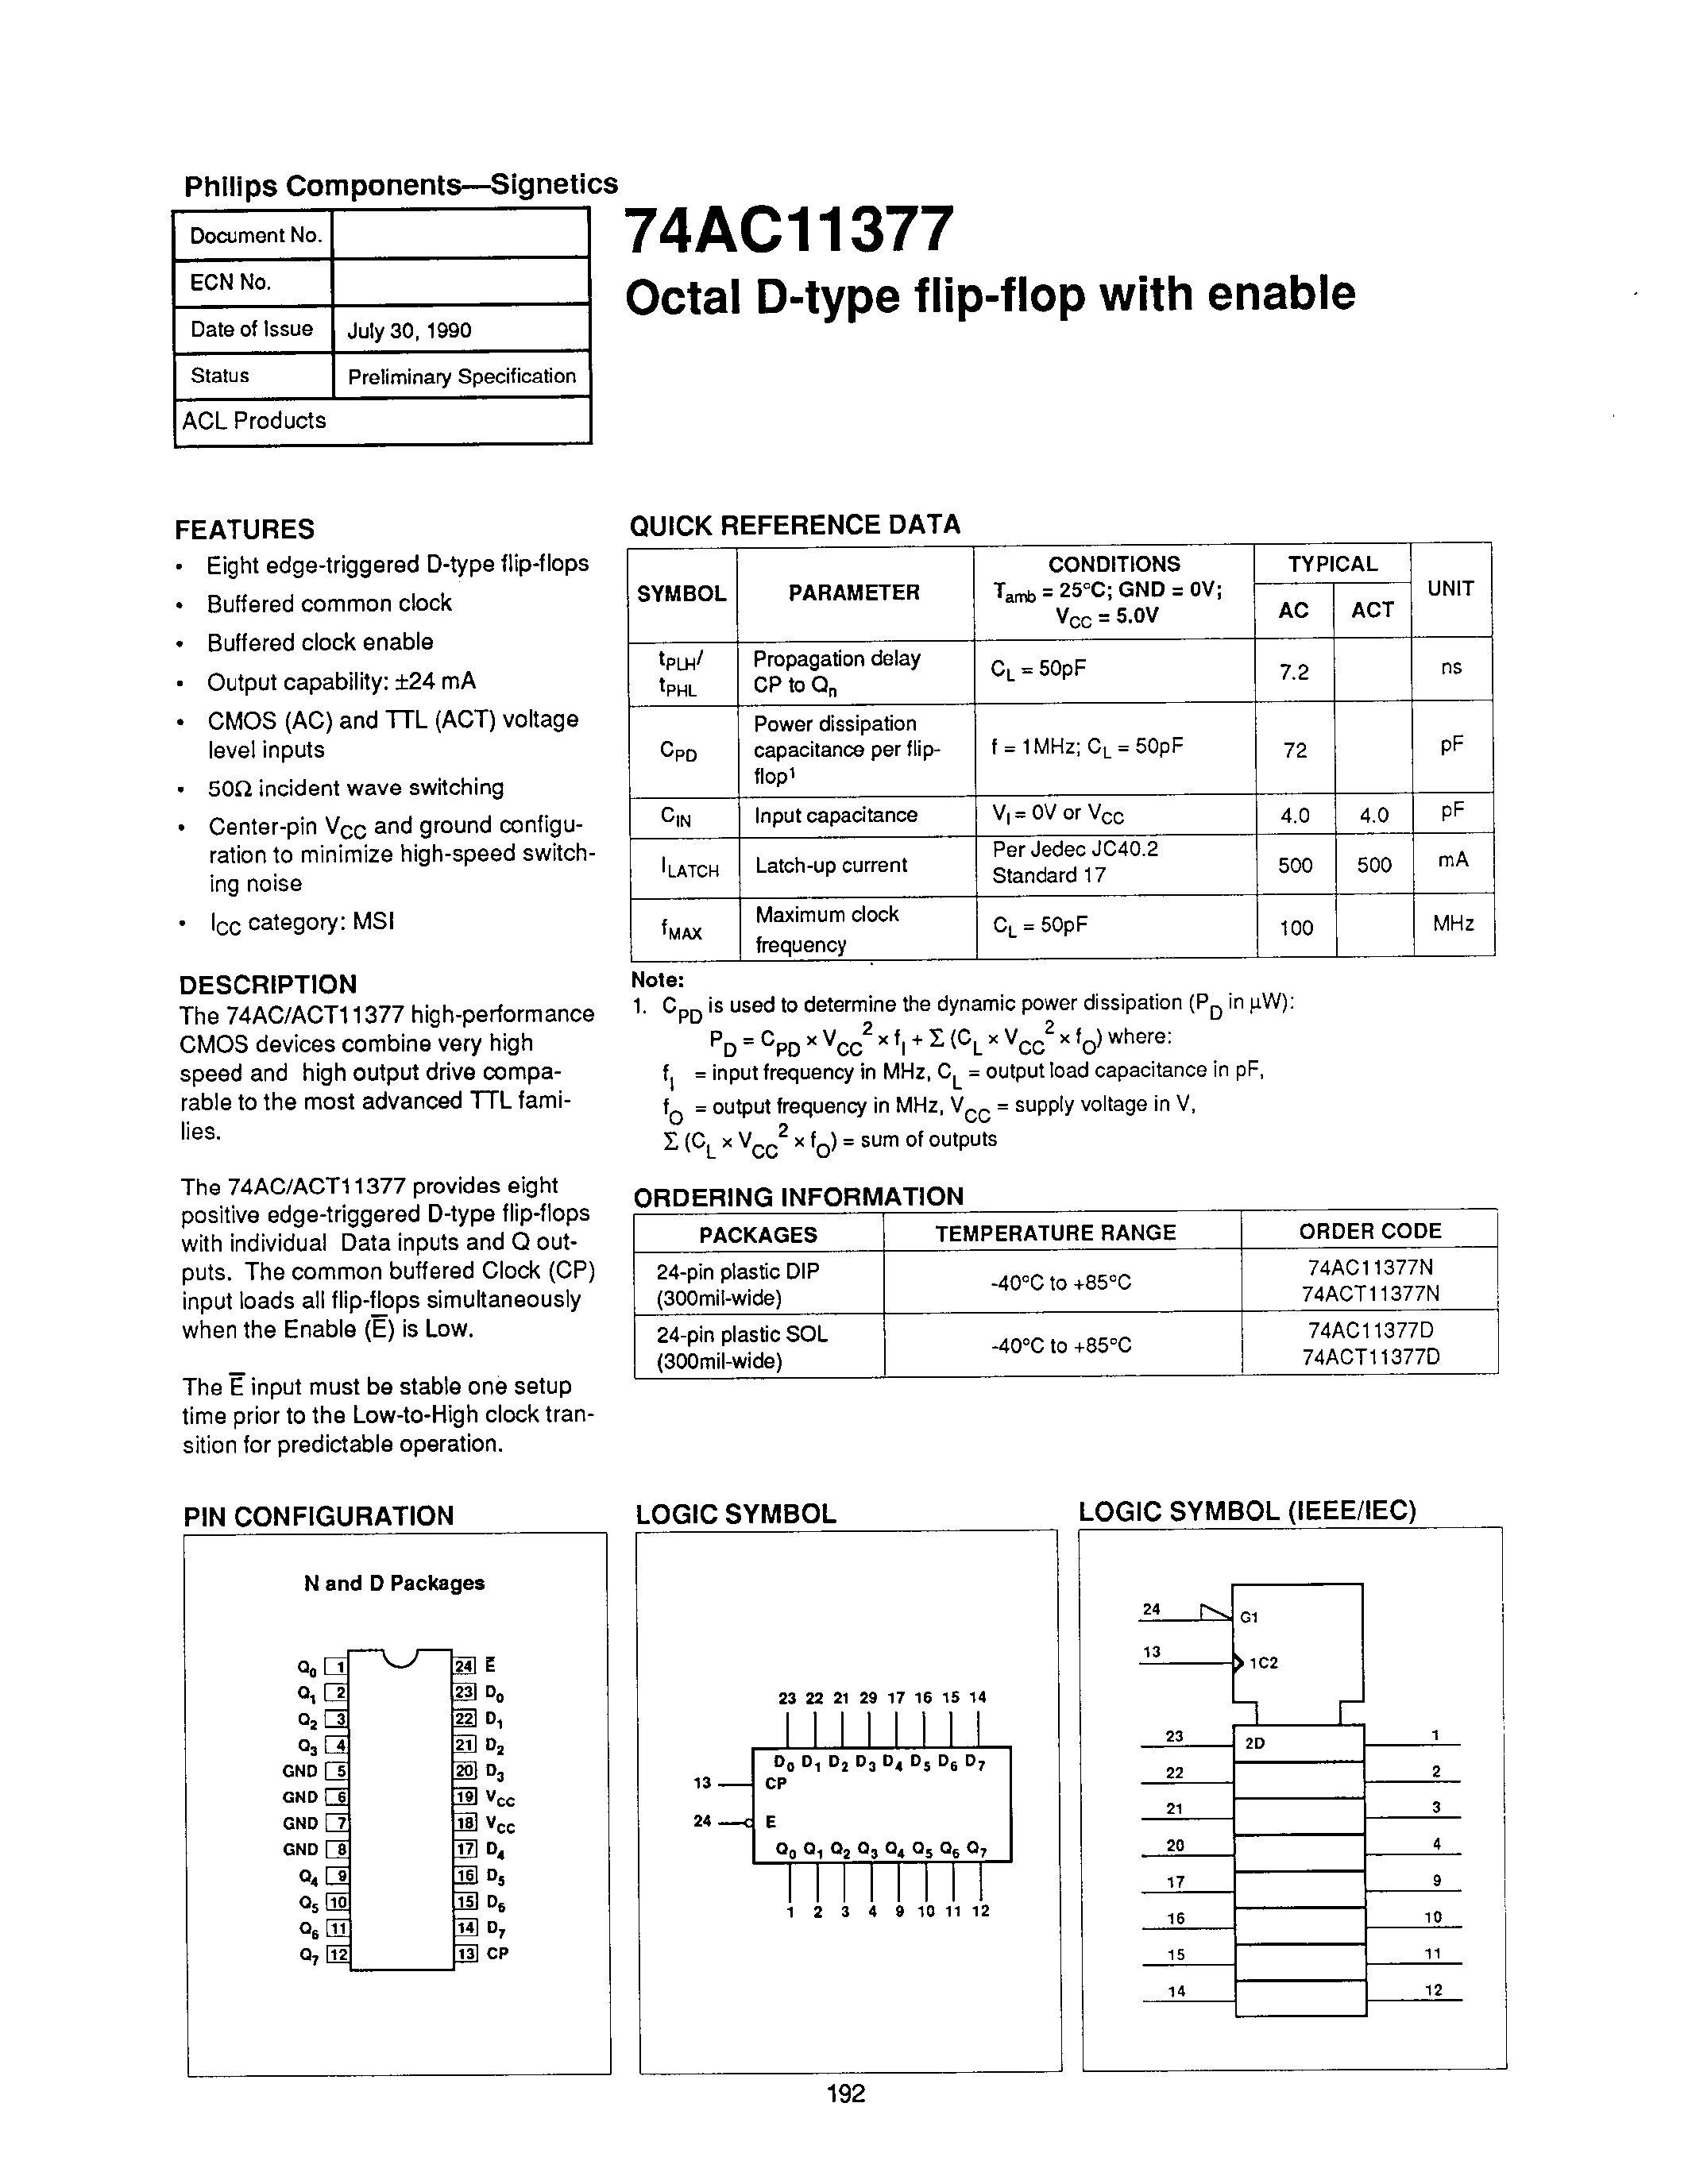 Datasheet 74AC11377N - OCTAL D TYPE FLIP FLOP WITH ENABLE page 1